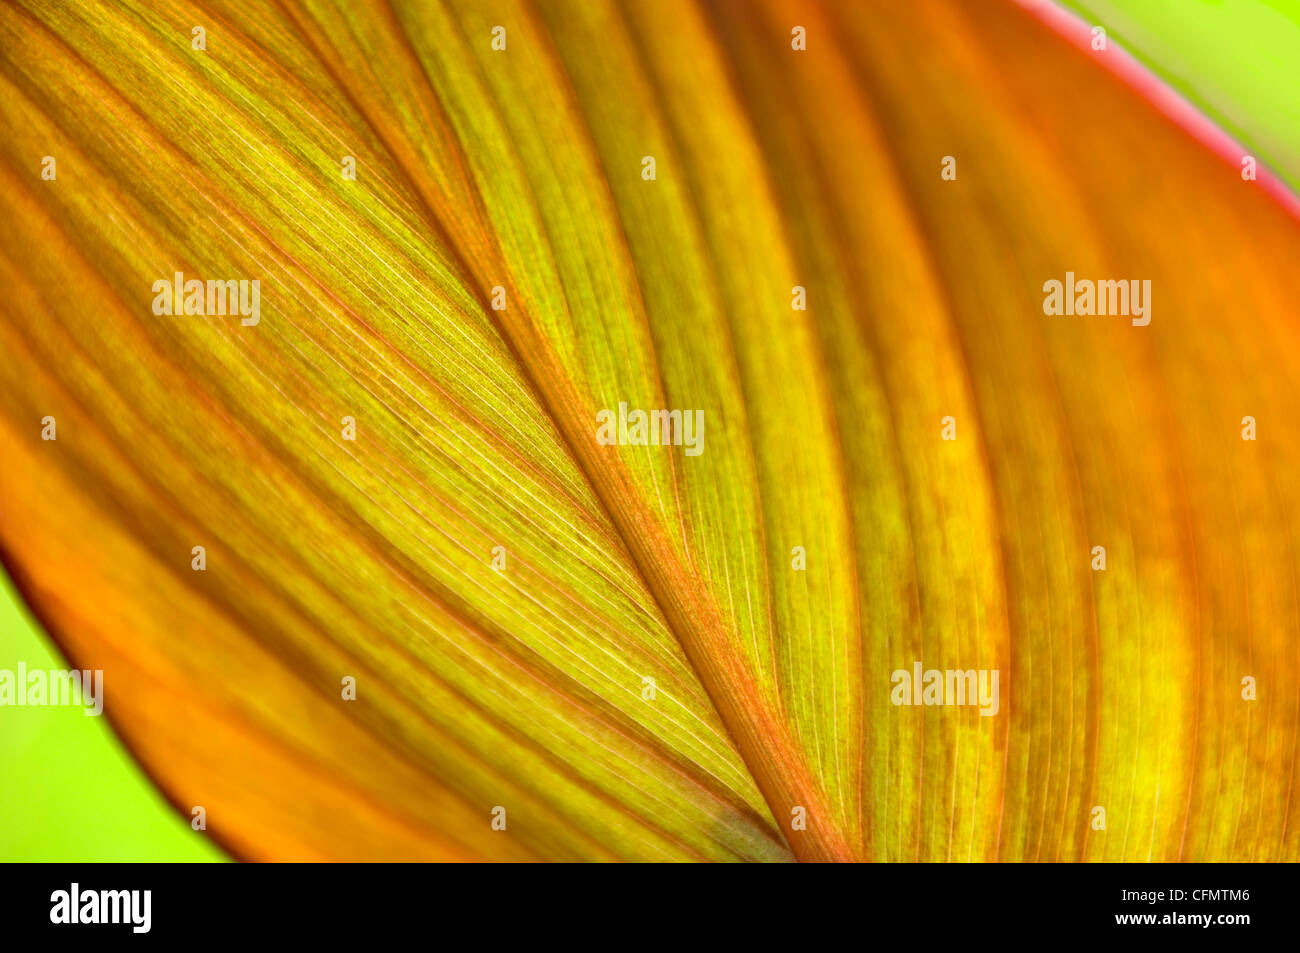 Horizontal close up of the leaf from an Indian Shot plant (Canna) in the sunshine. Stock Photo